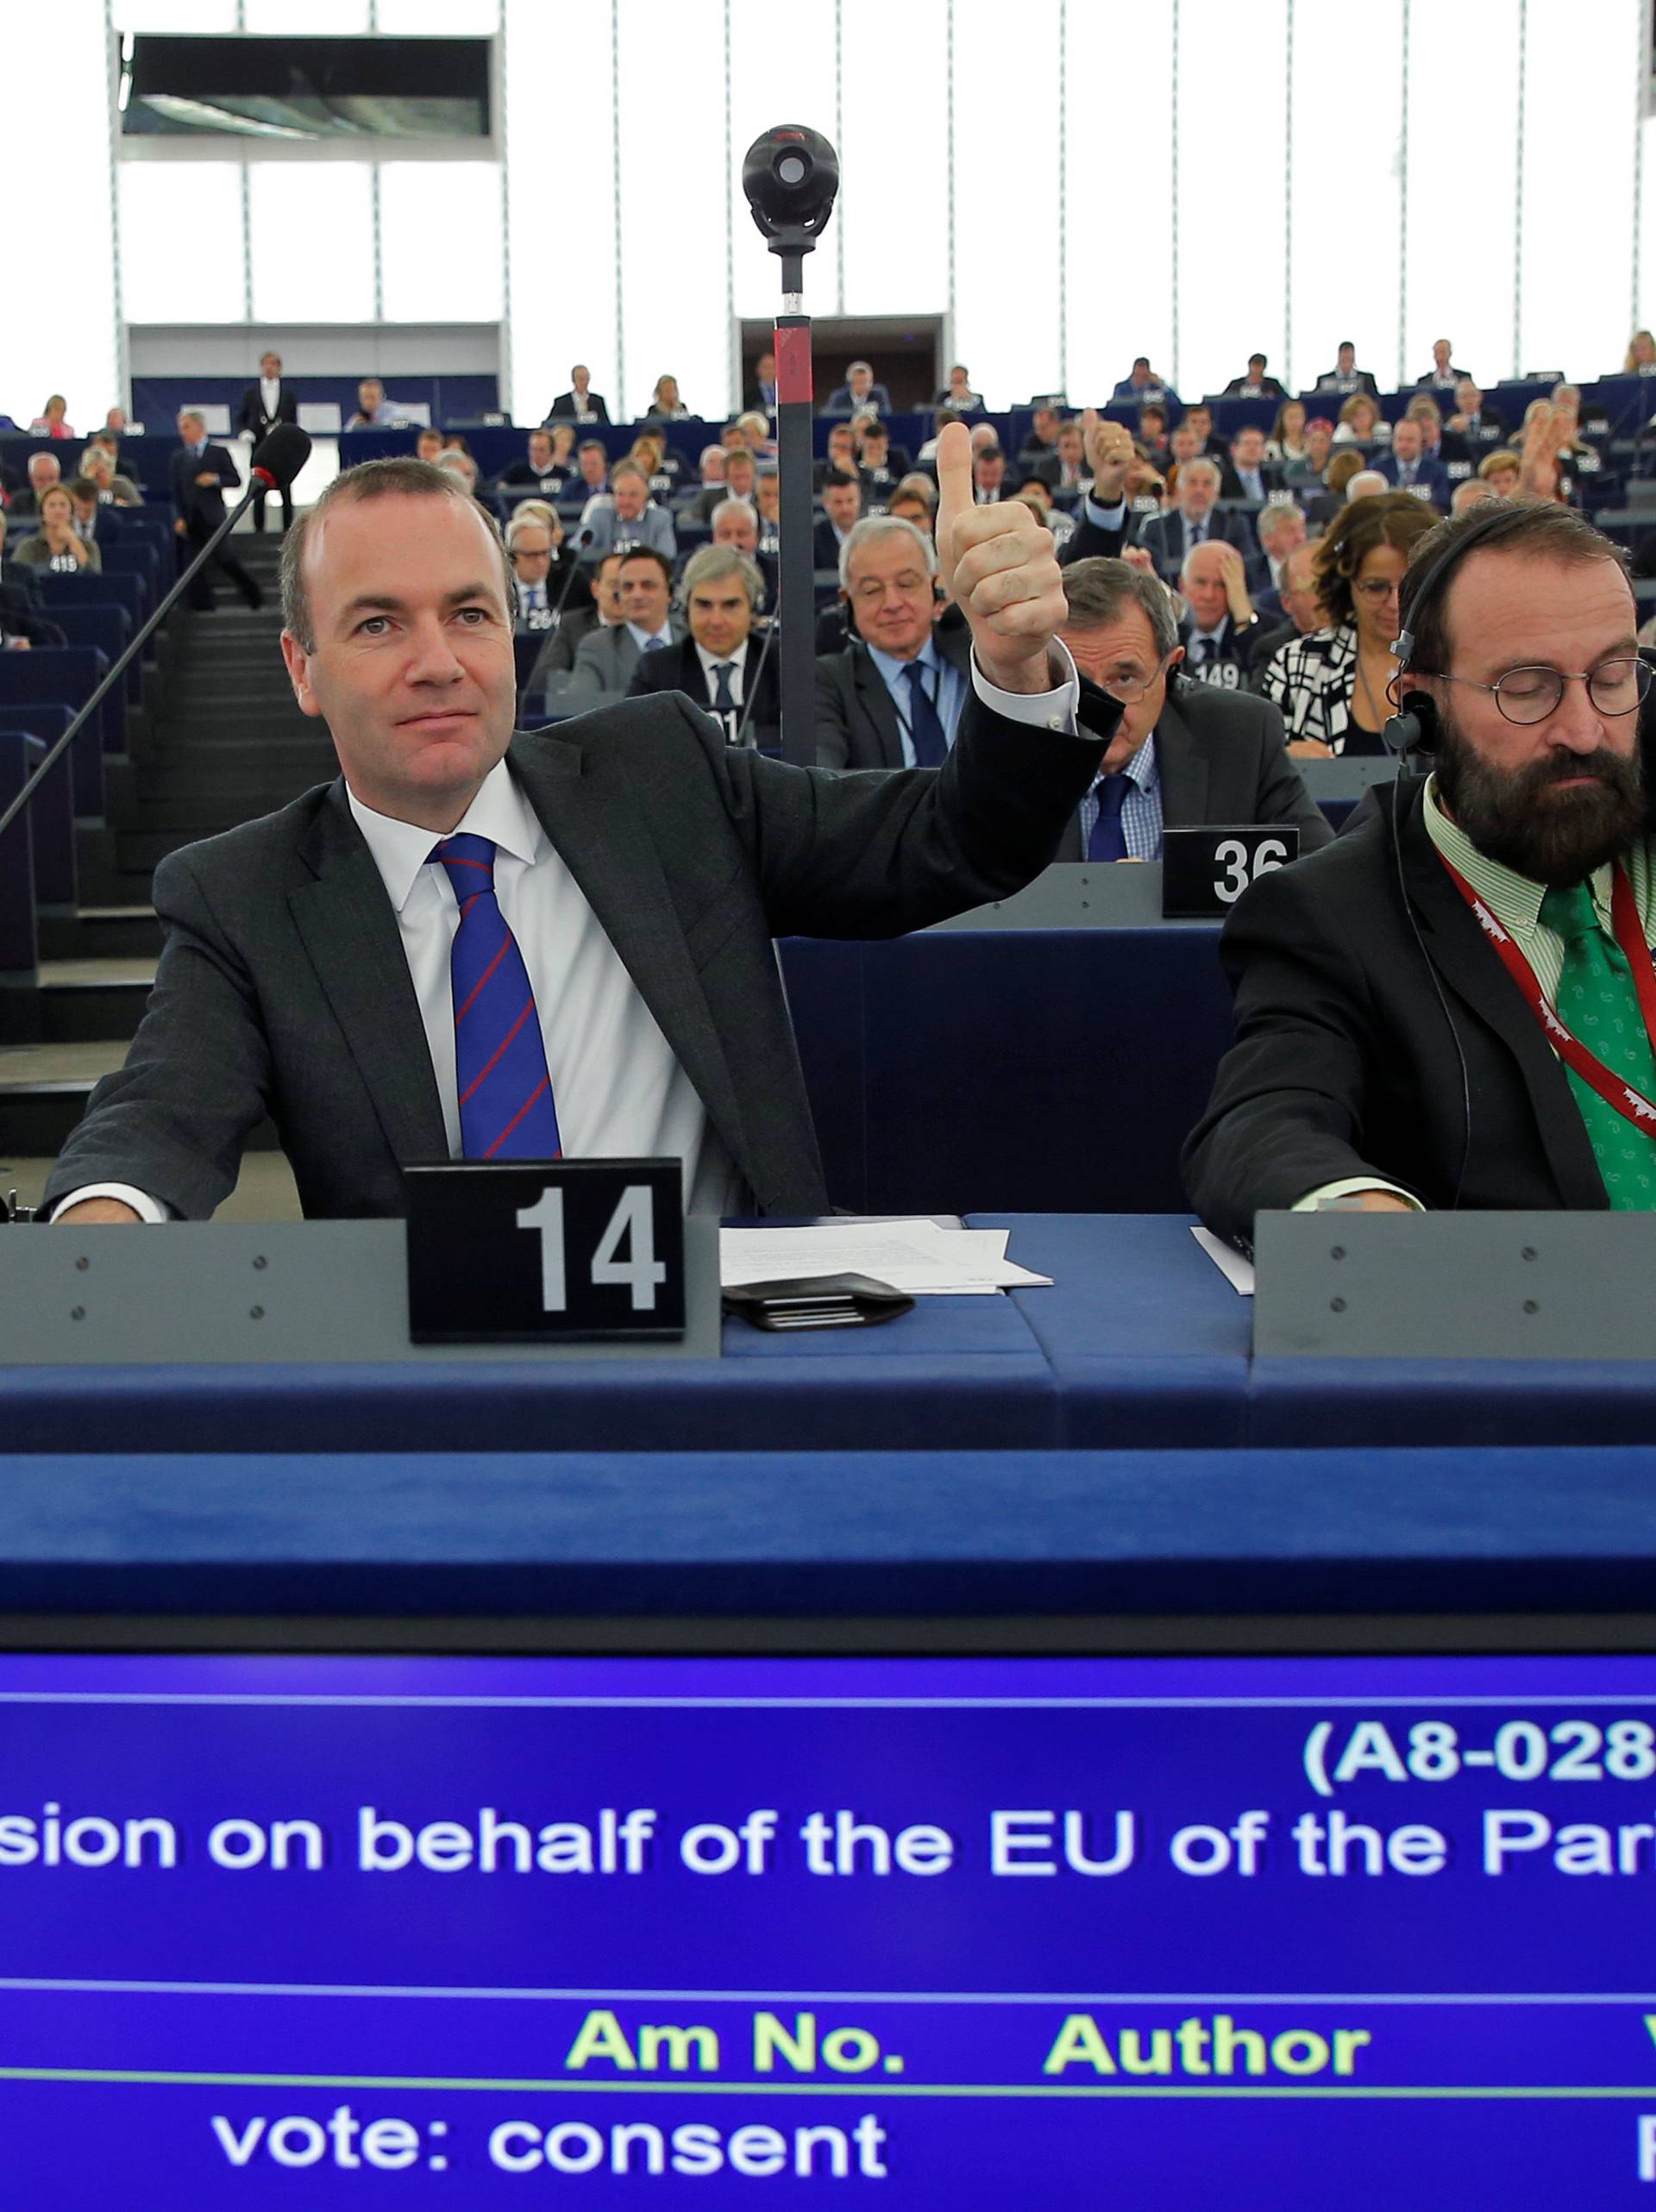 MEP's vote in favor of the Paris UN COP21 Climate Change agreement during a voting session at the European Parliament in Strasbourg